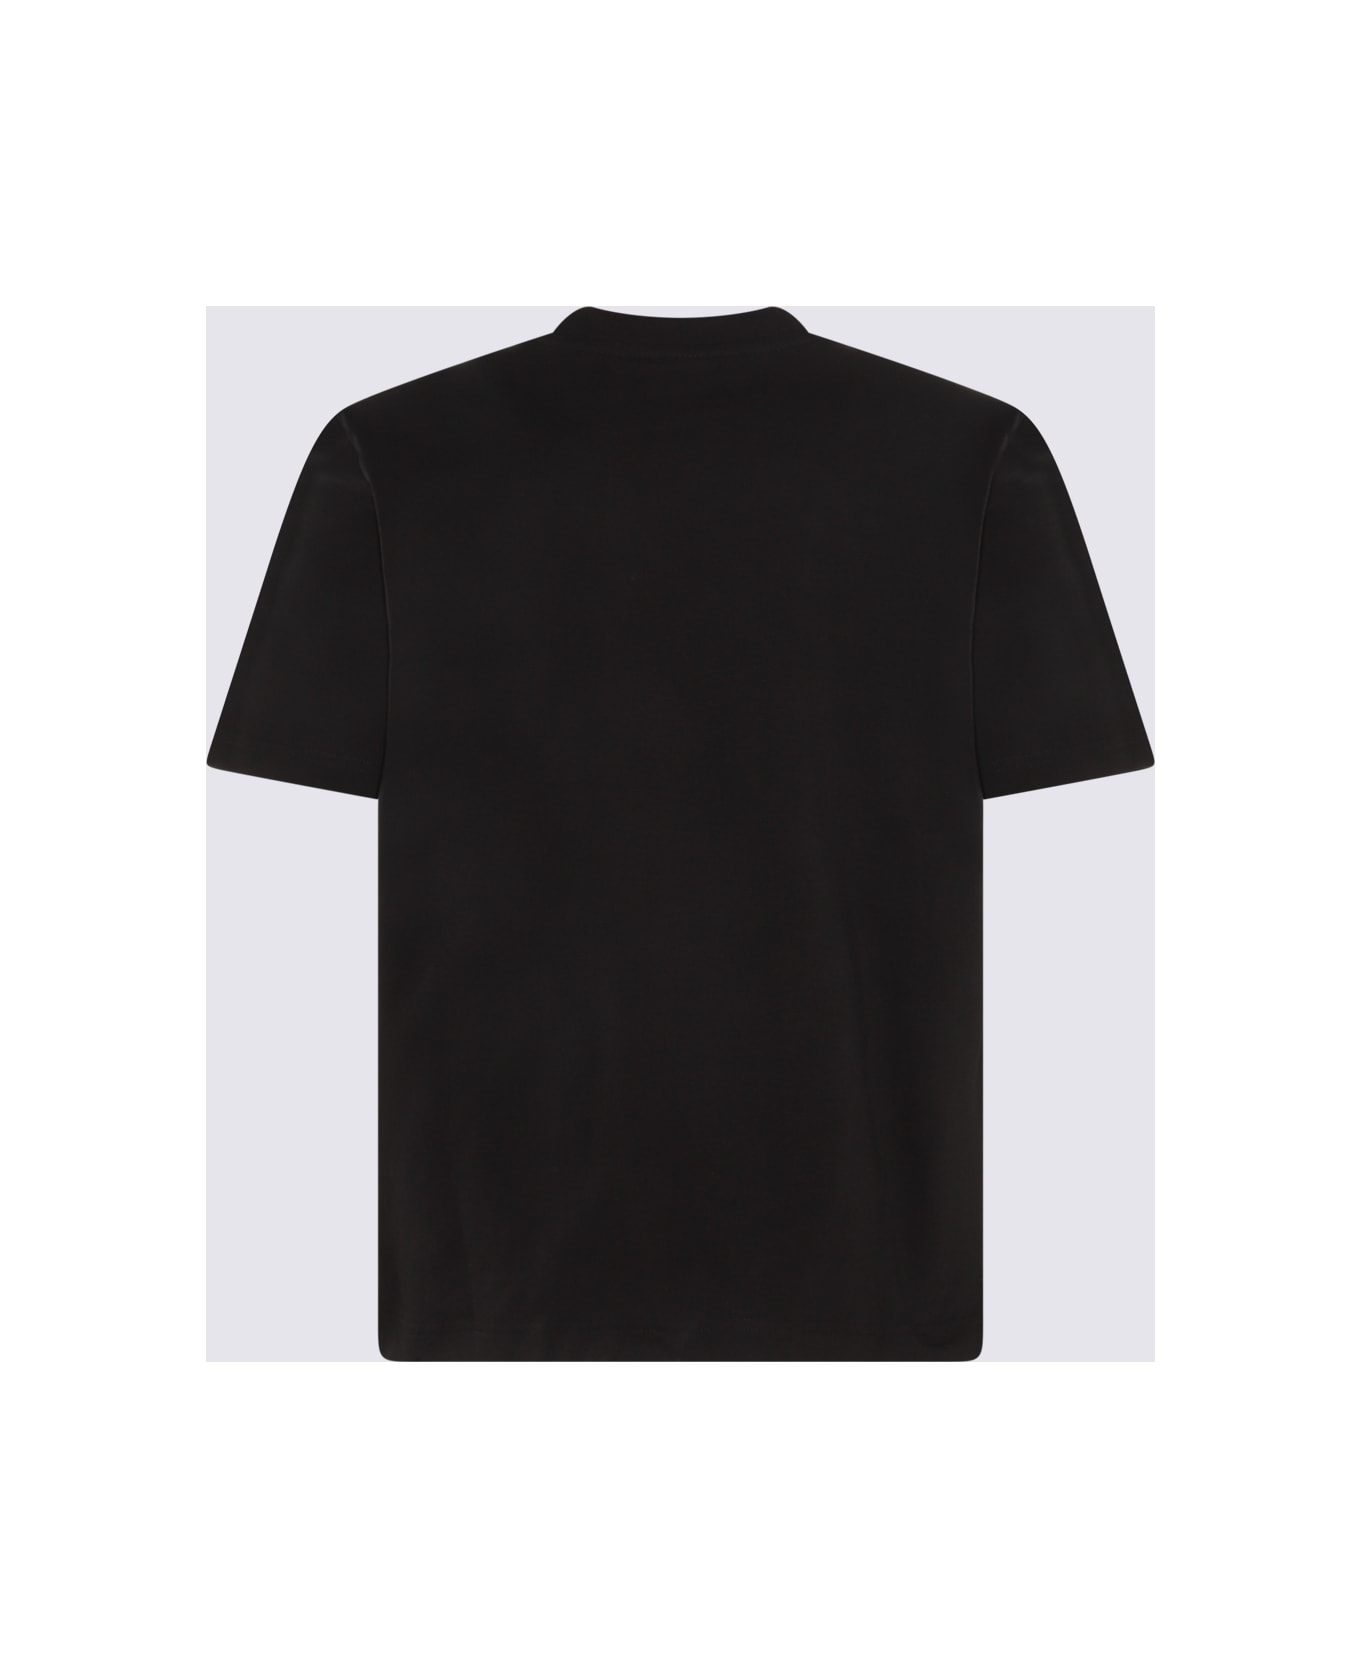 Paul Smith Black And Green Cotton T-shirt - Black